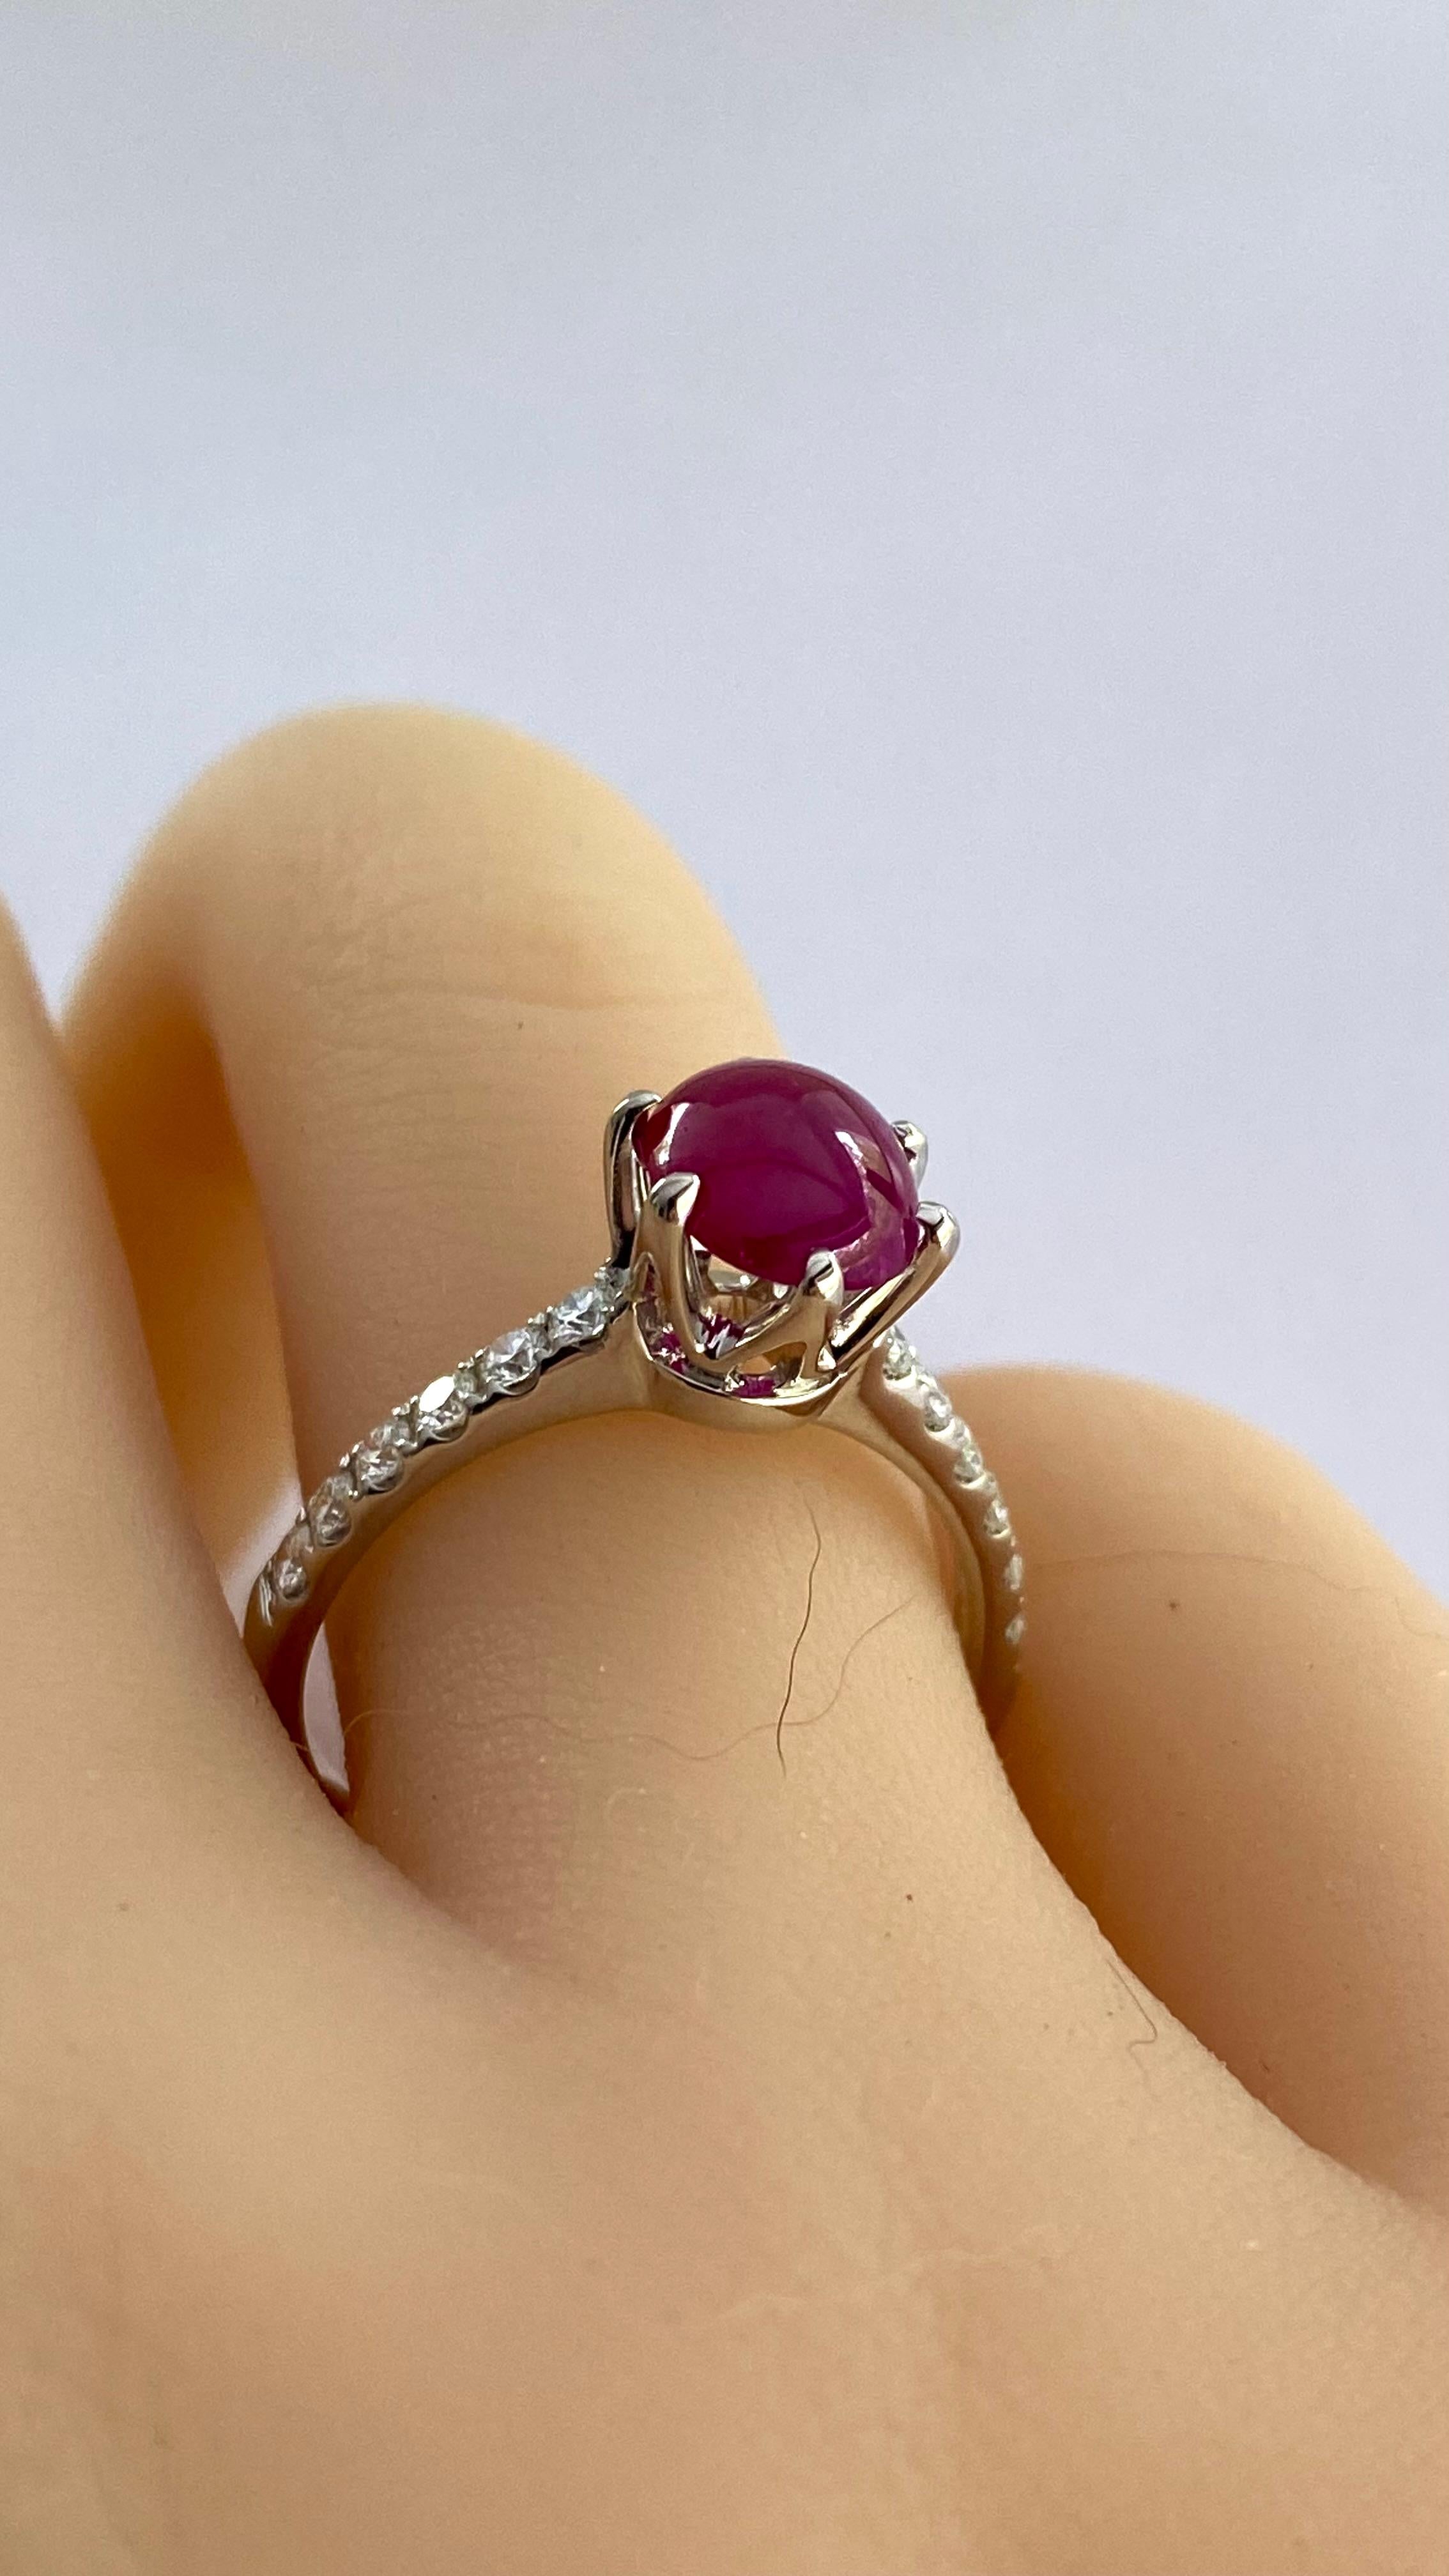 Contemporary Vintage 18K Gold Cushion Burma Ruby Weighing 2.10 Carat Diamond Engagement Ring For Sale